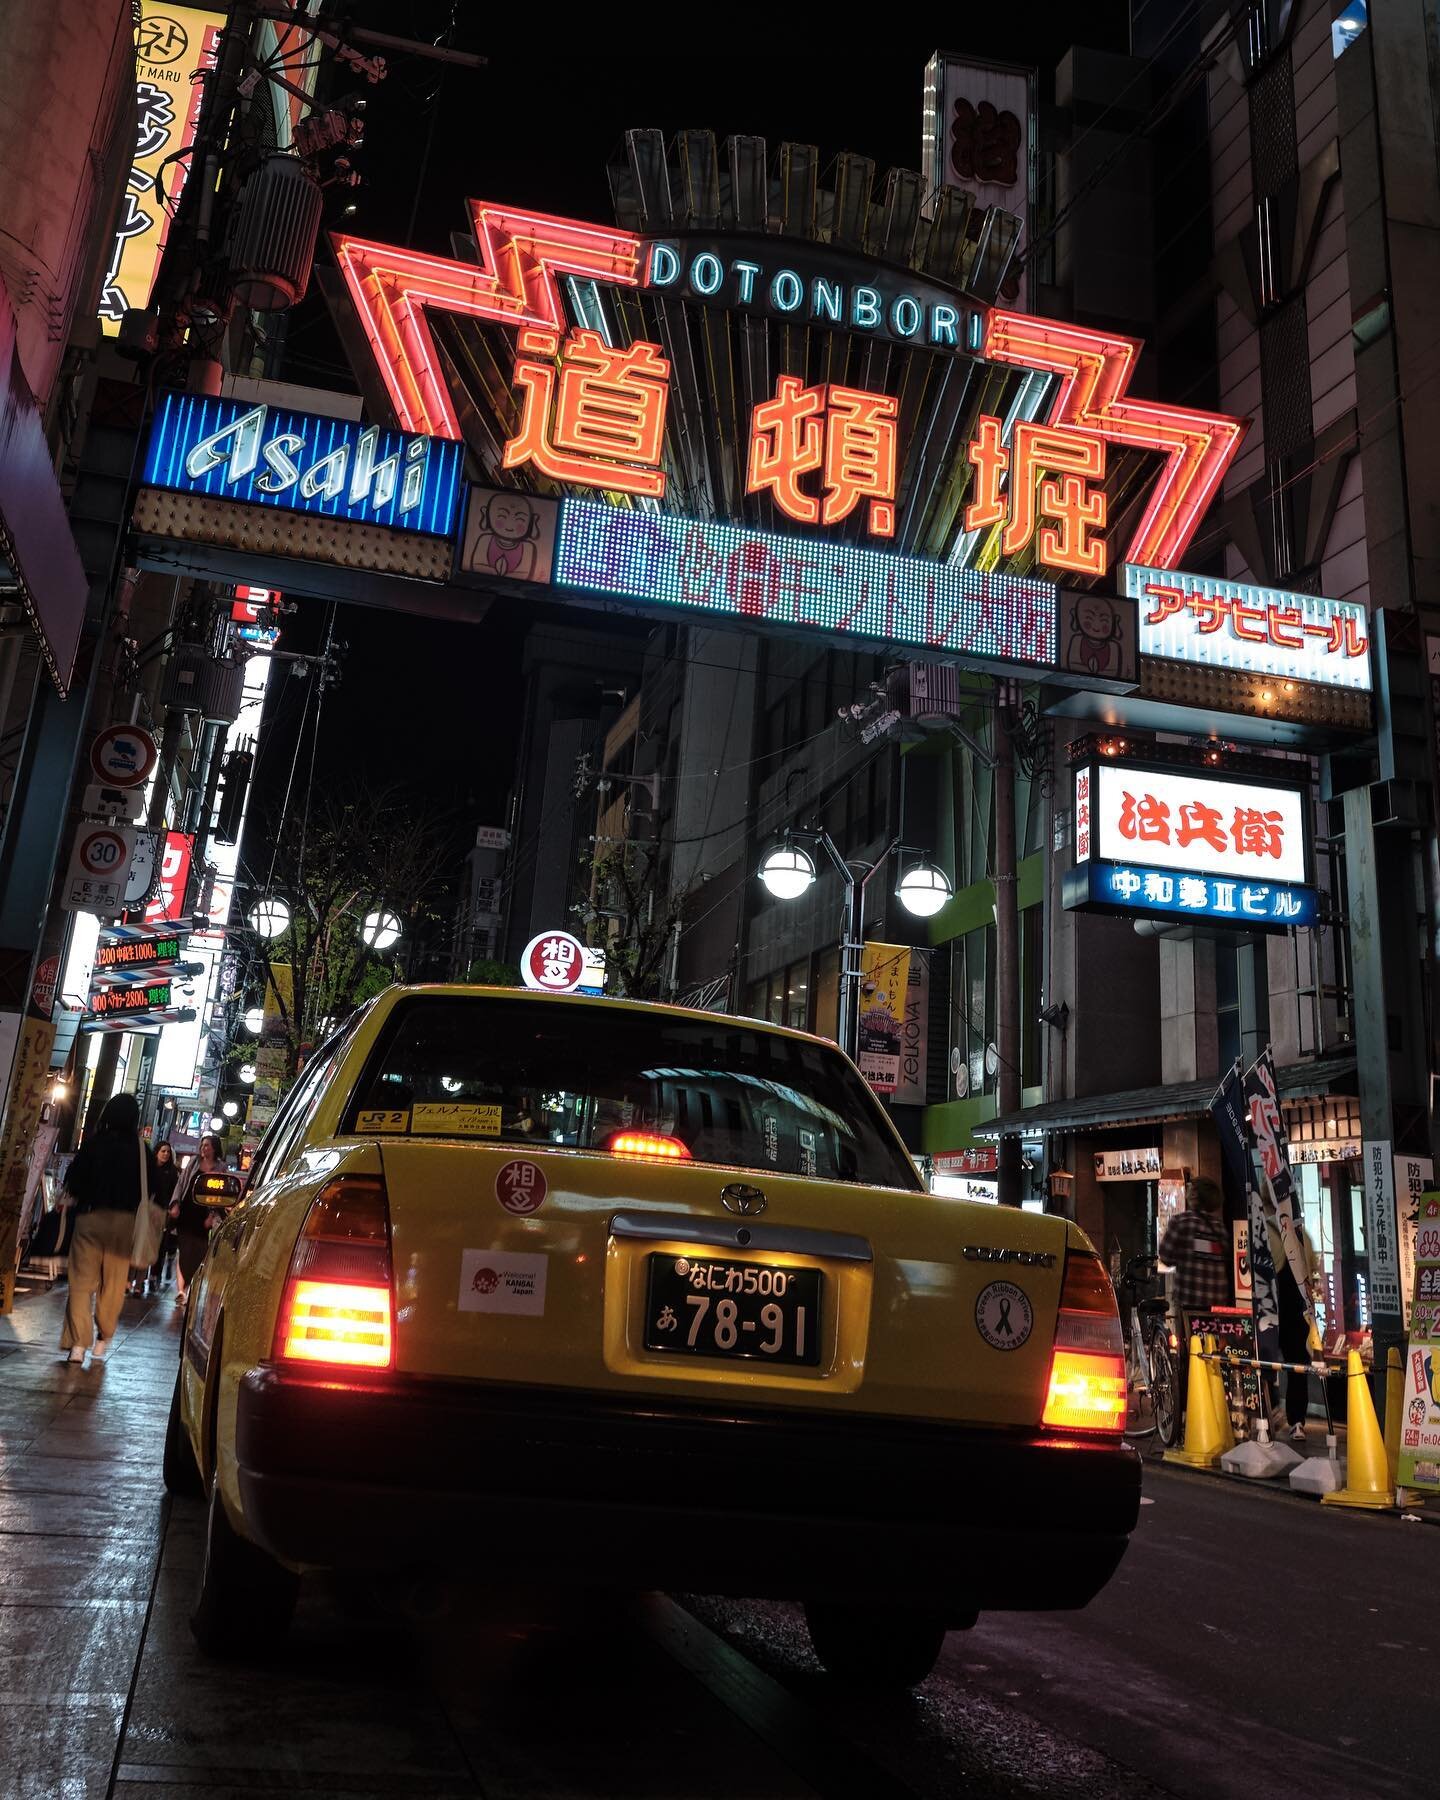 &ldquo;The Future is Now&rdquo;⁣
⁣
There is nothing quite like walking through Dotonbori in Osaka at night.⁣
It&rsquo;s like walking through a movie set when all of the neon lights are shining bright.⁣
Osaka&rsquo;s culture is so different to the res